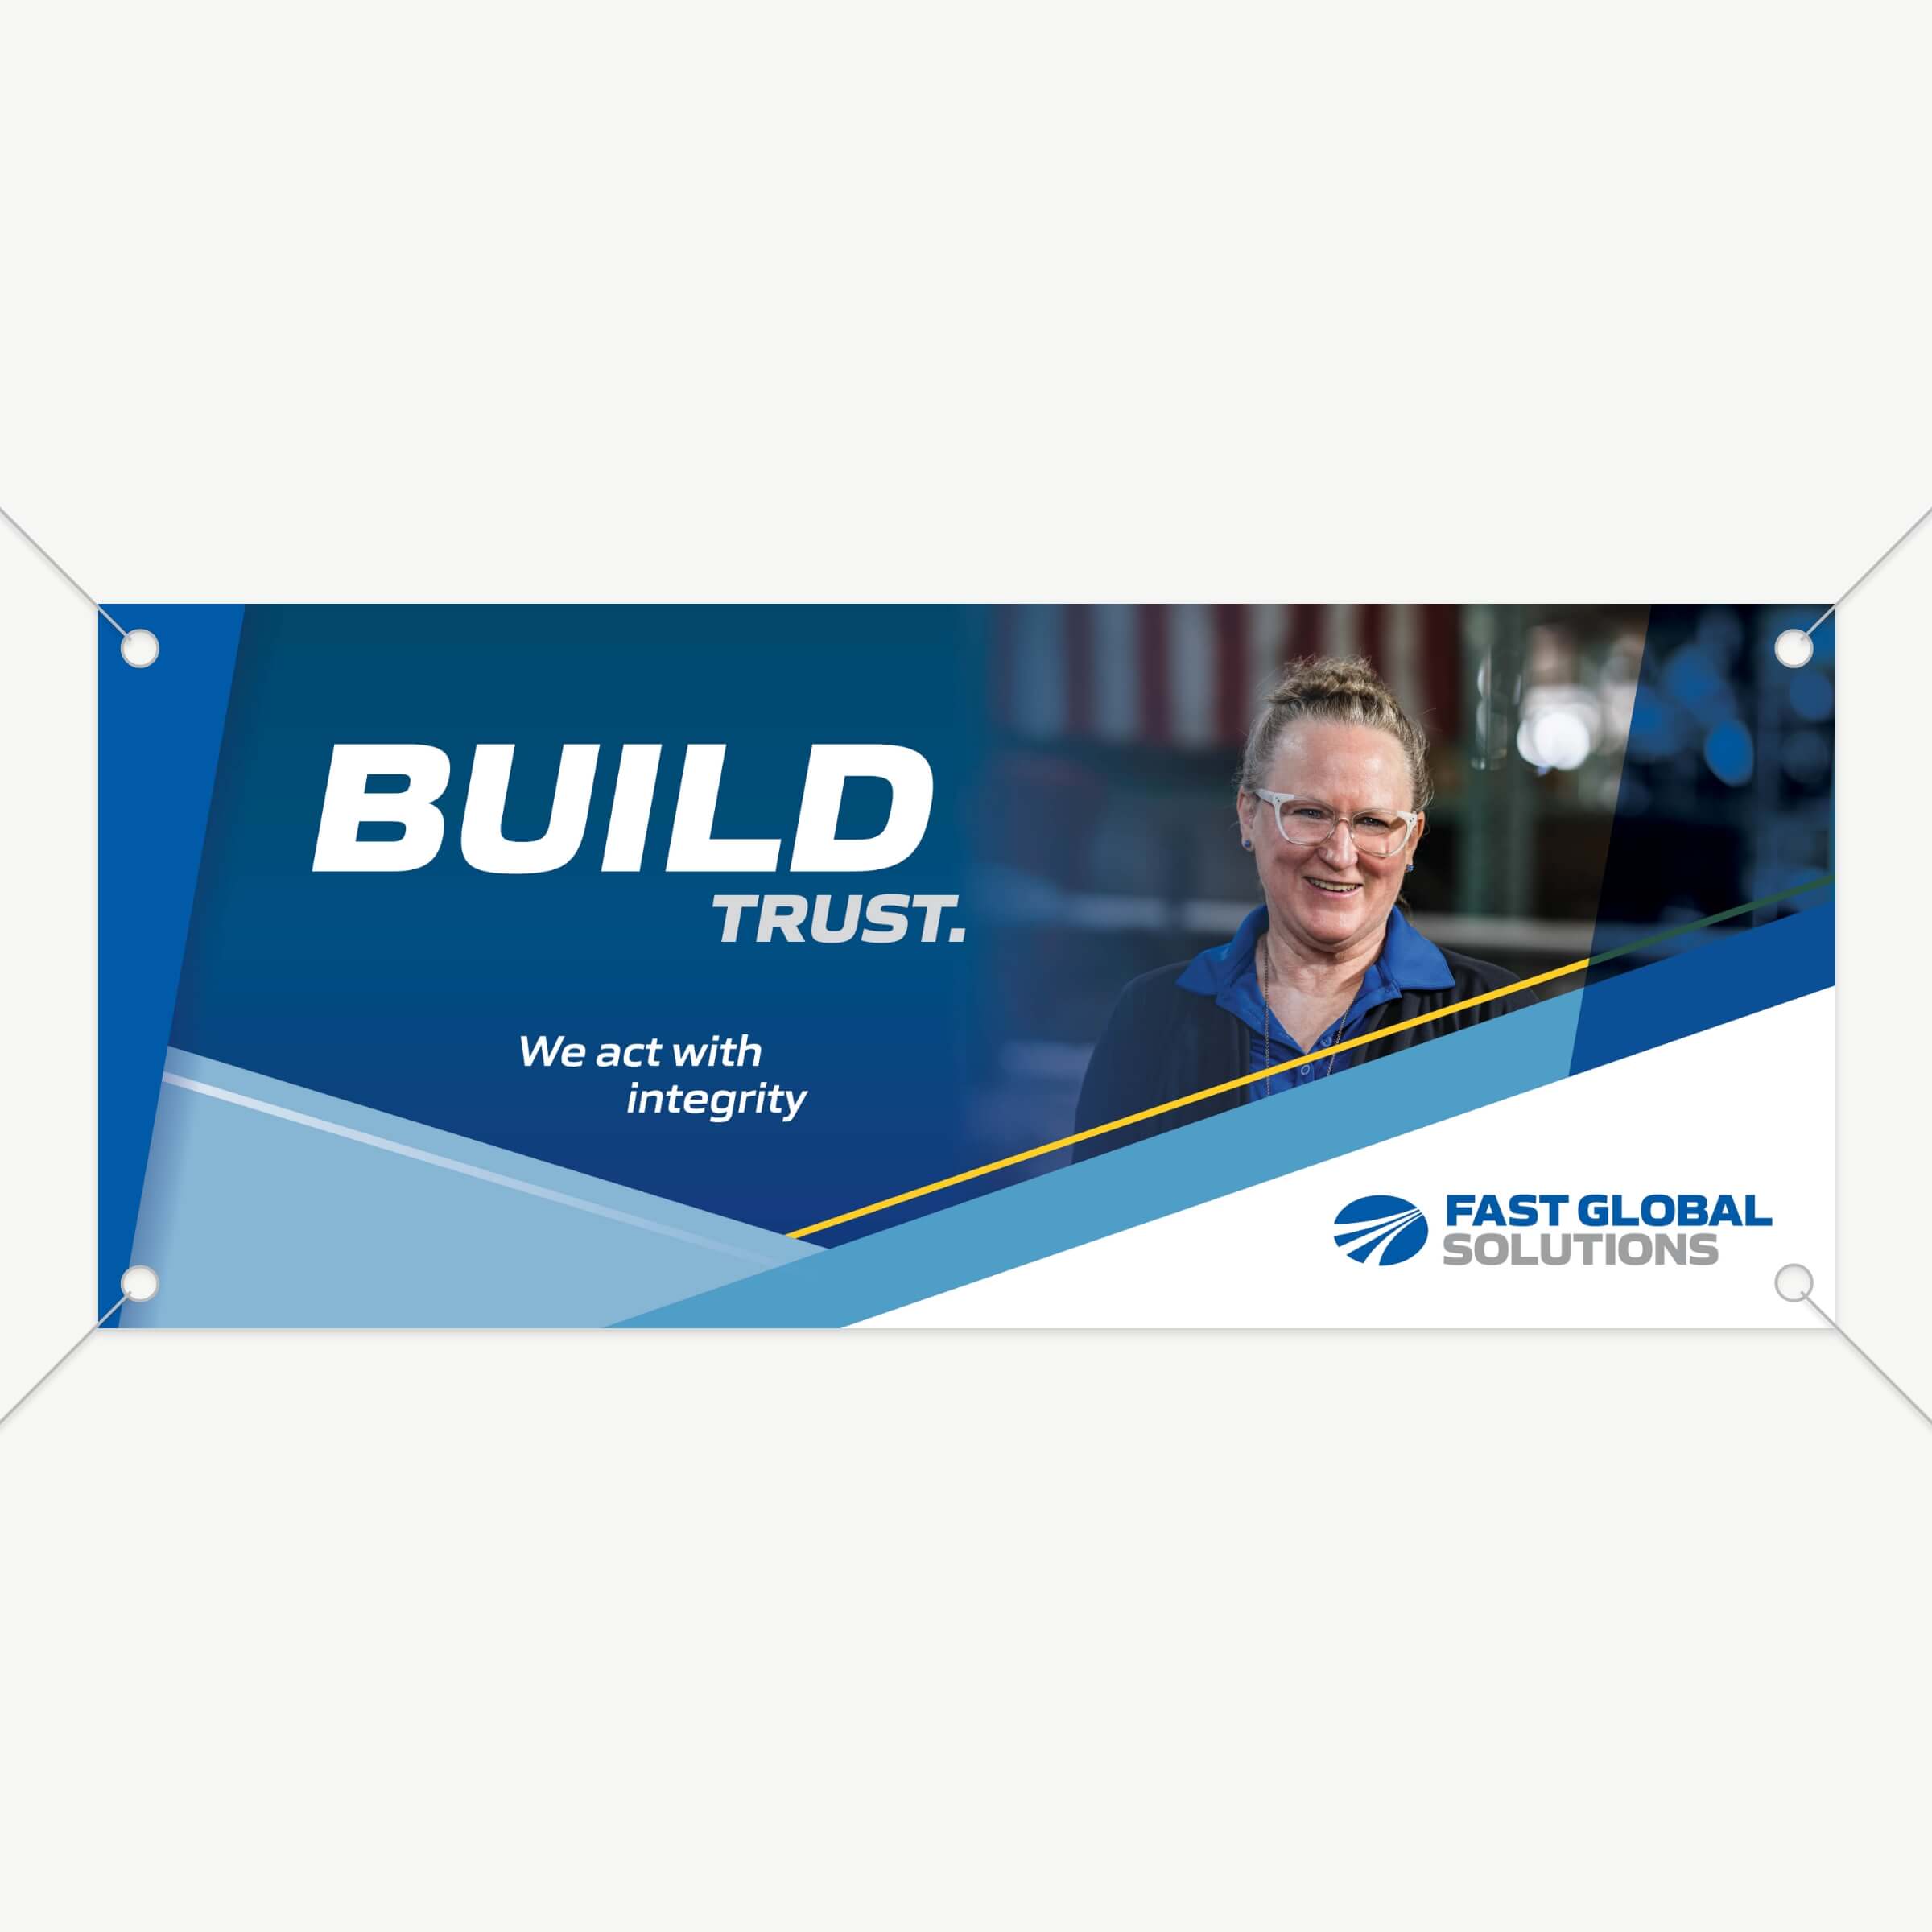 A horizontal banner featuring an employee image and one of the company values.